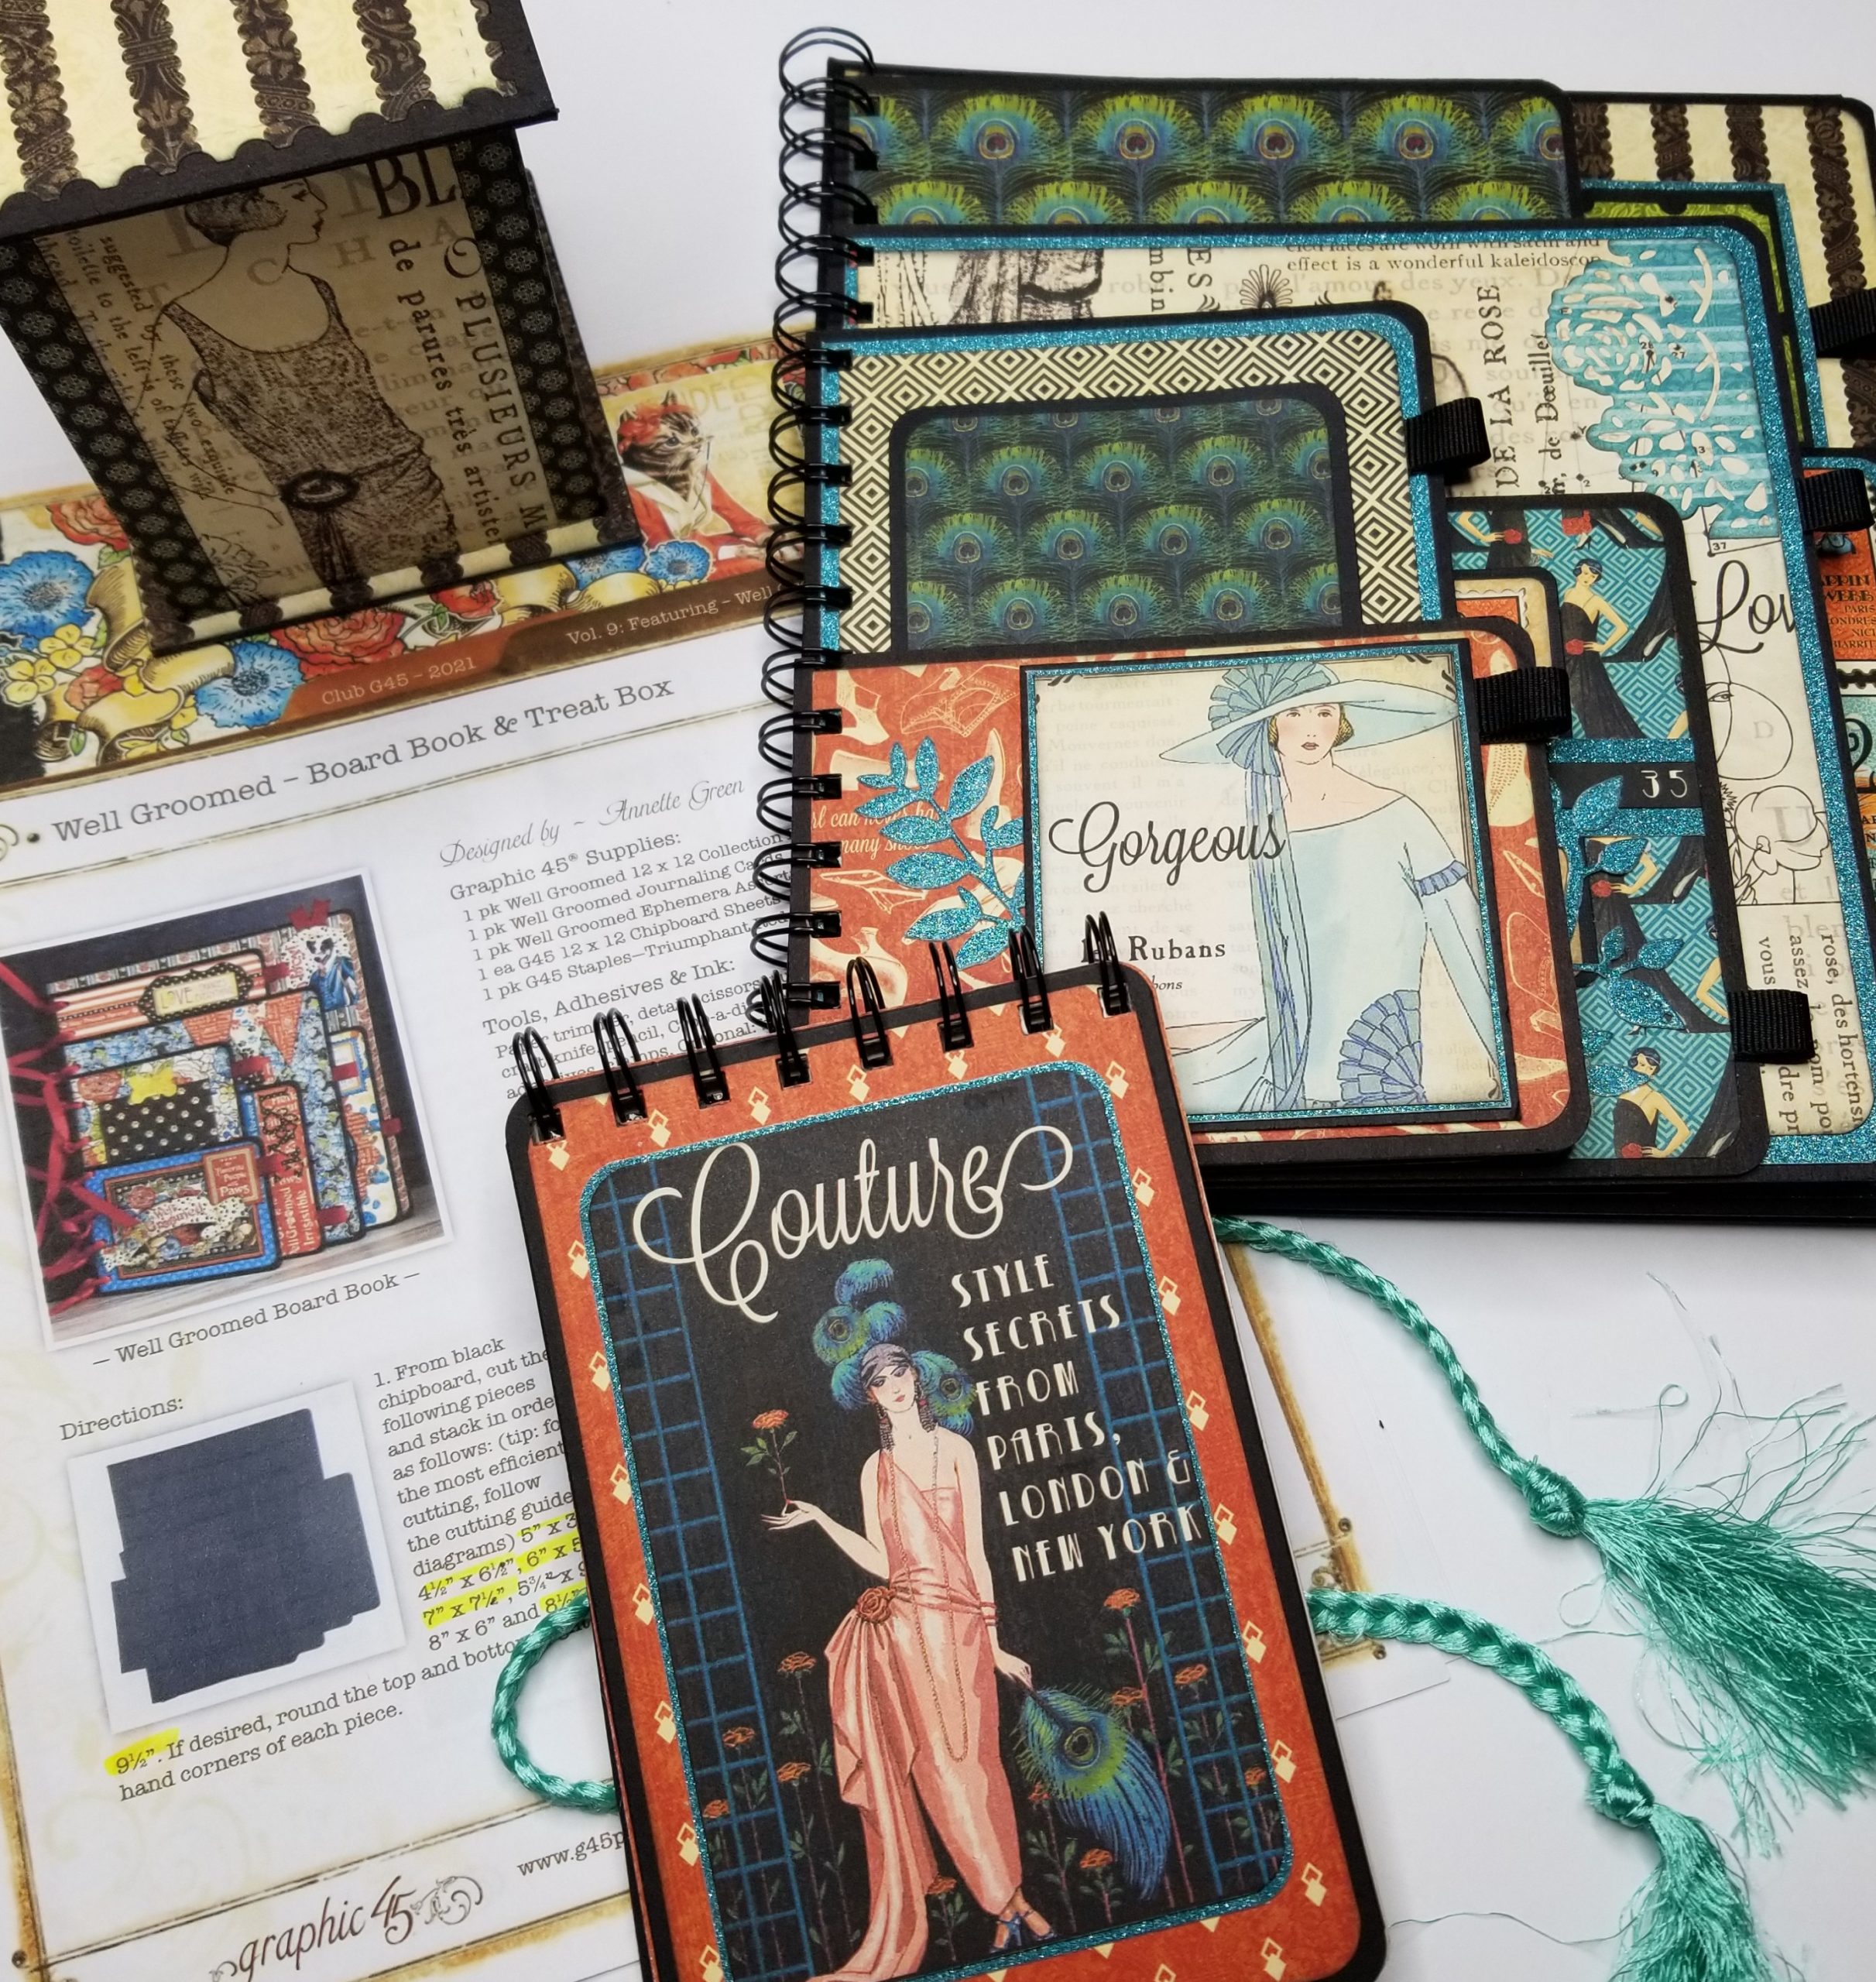 Couture, Graphic 45, Board Book, Notebook, Box, Jenn DuBell